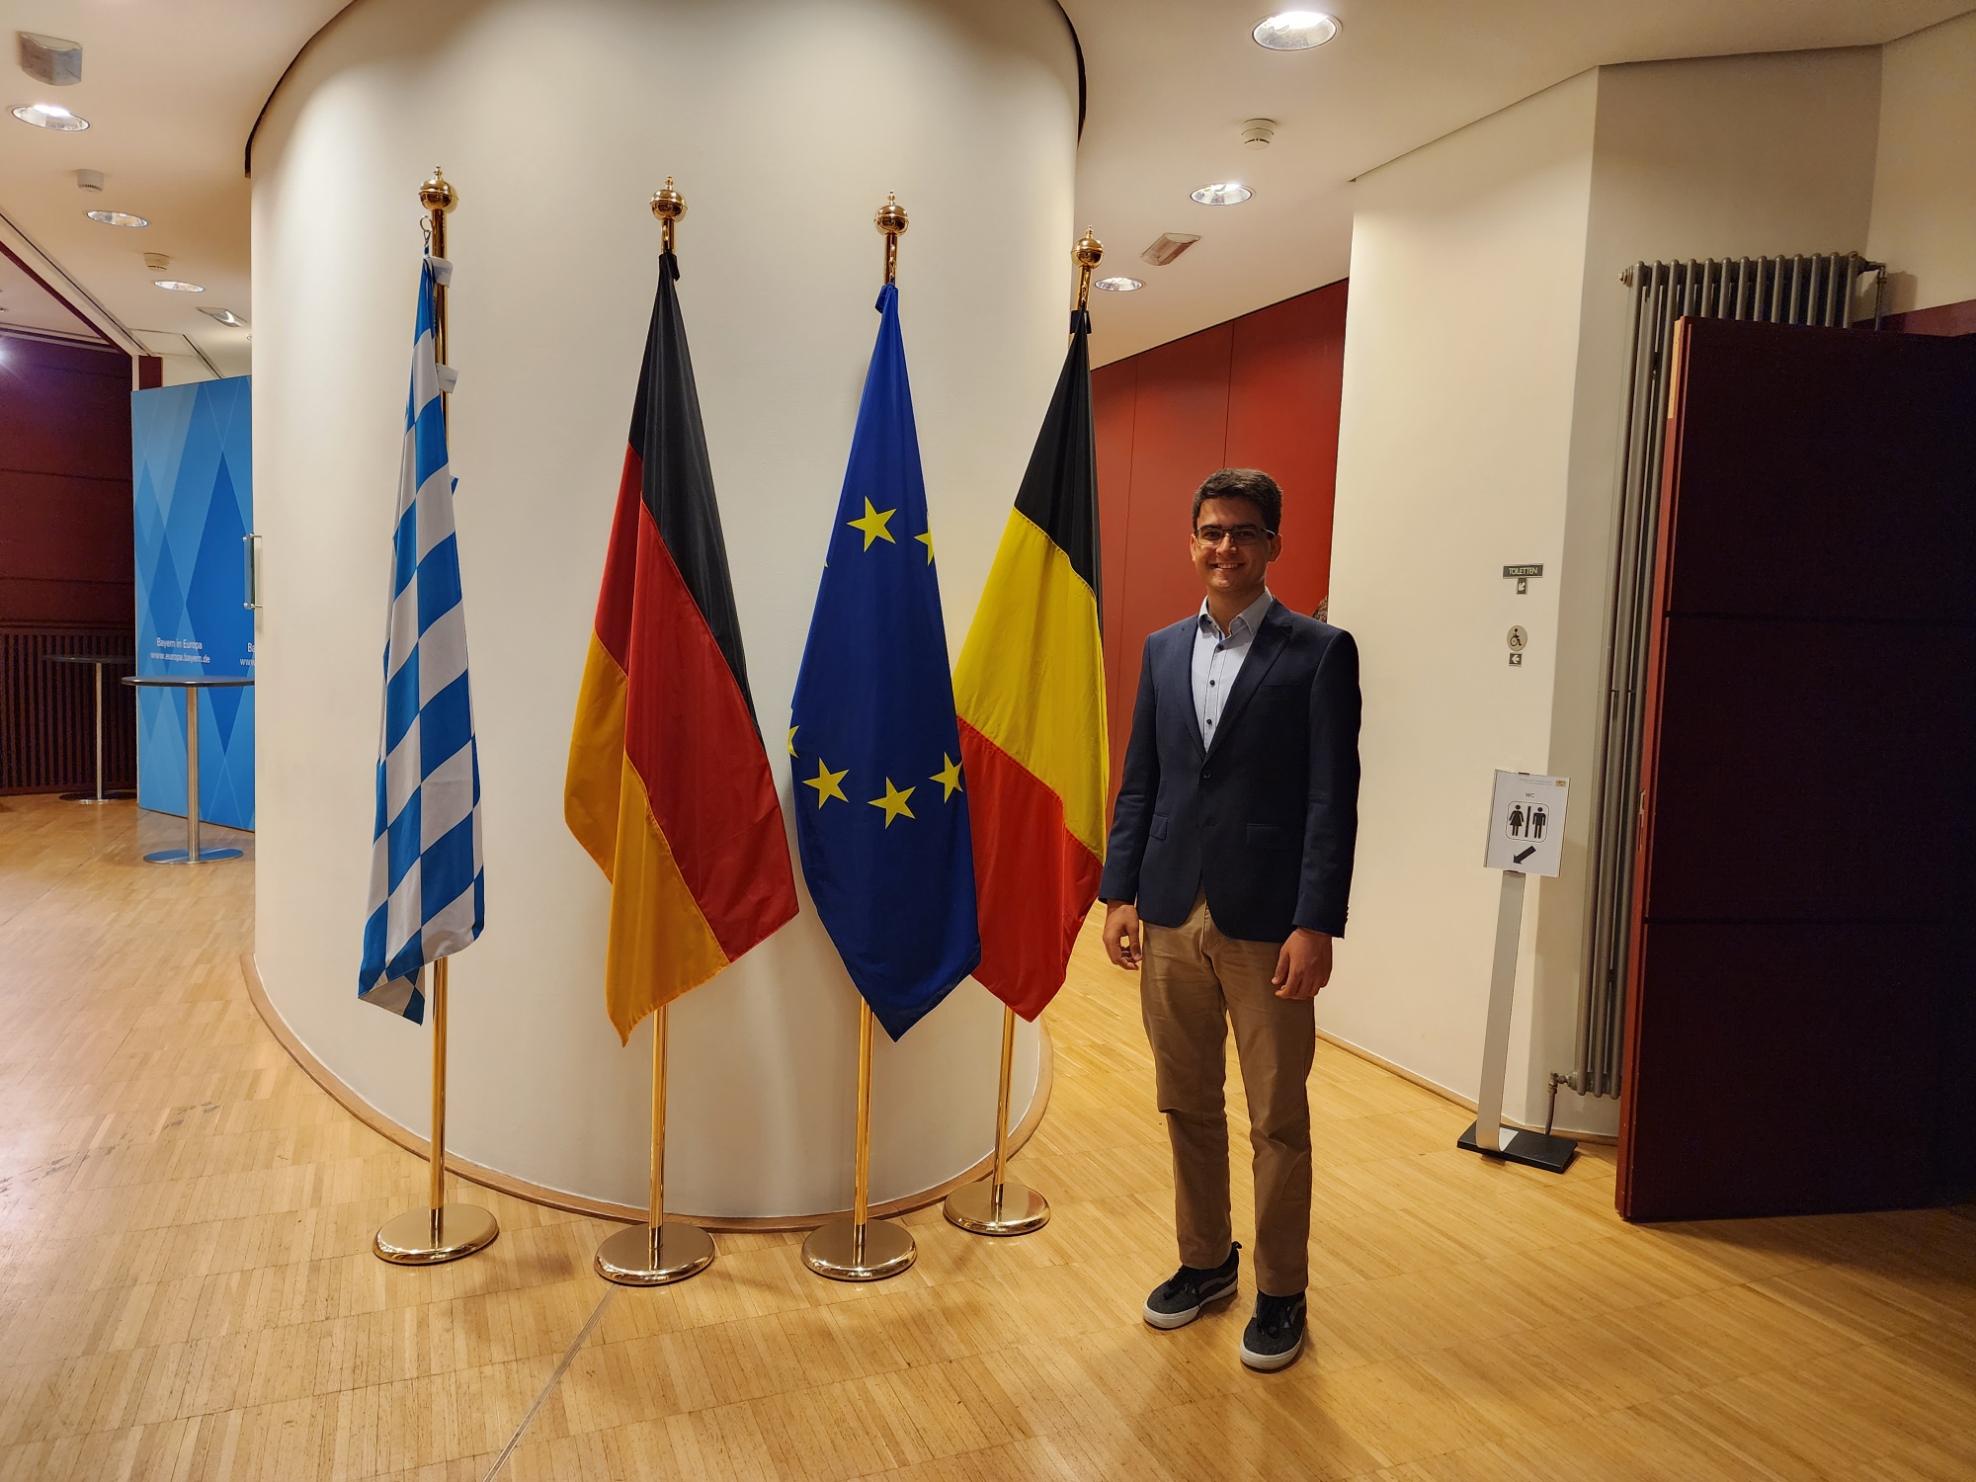 Milan Ferus-Comelo in front of flags